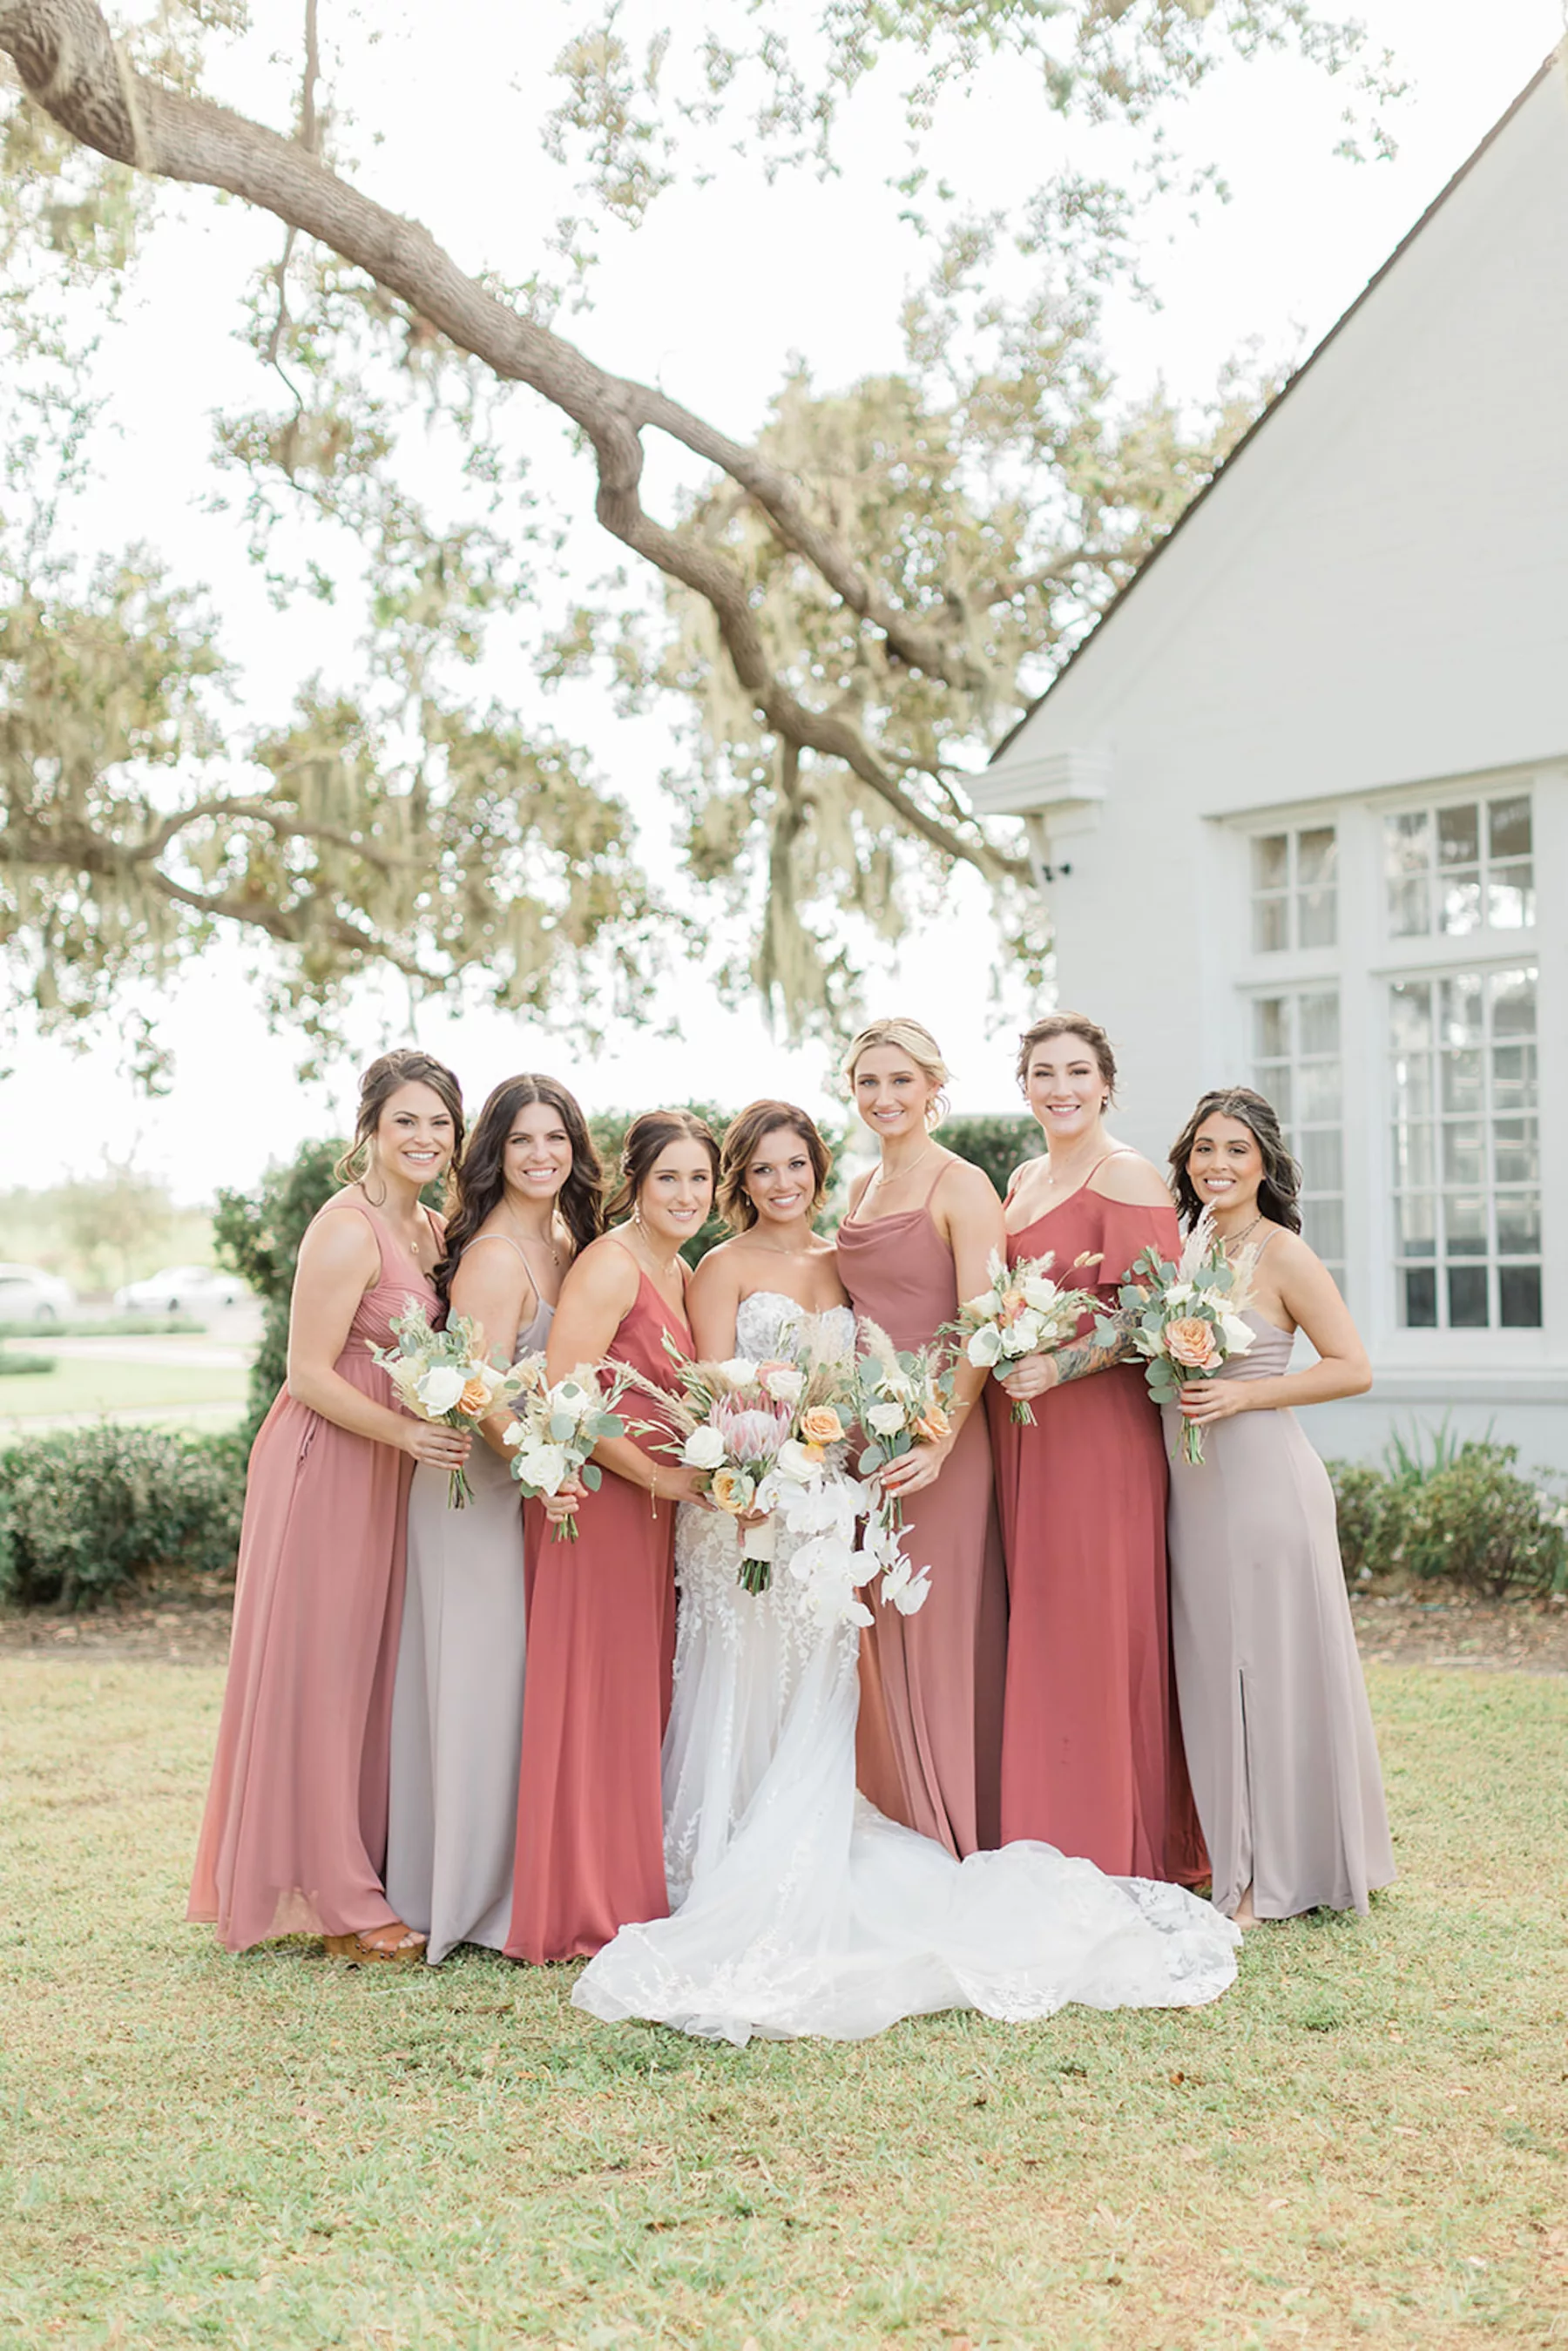 Mismatched Chiffon Floor Length Taupe, Dusty Rose, Terracotta Bridesmaid Dress Ideas | Boho Wedding Bouquets with Pampas Grass, White and Orange Roses, Pink King Protea, Orchids, and Eucalyptus Inspiration | Tampa Bay Hair and Makeup Artist Femme Akoi Beauty Studio